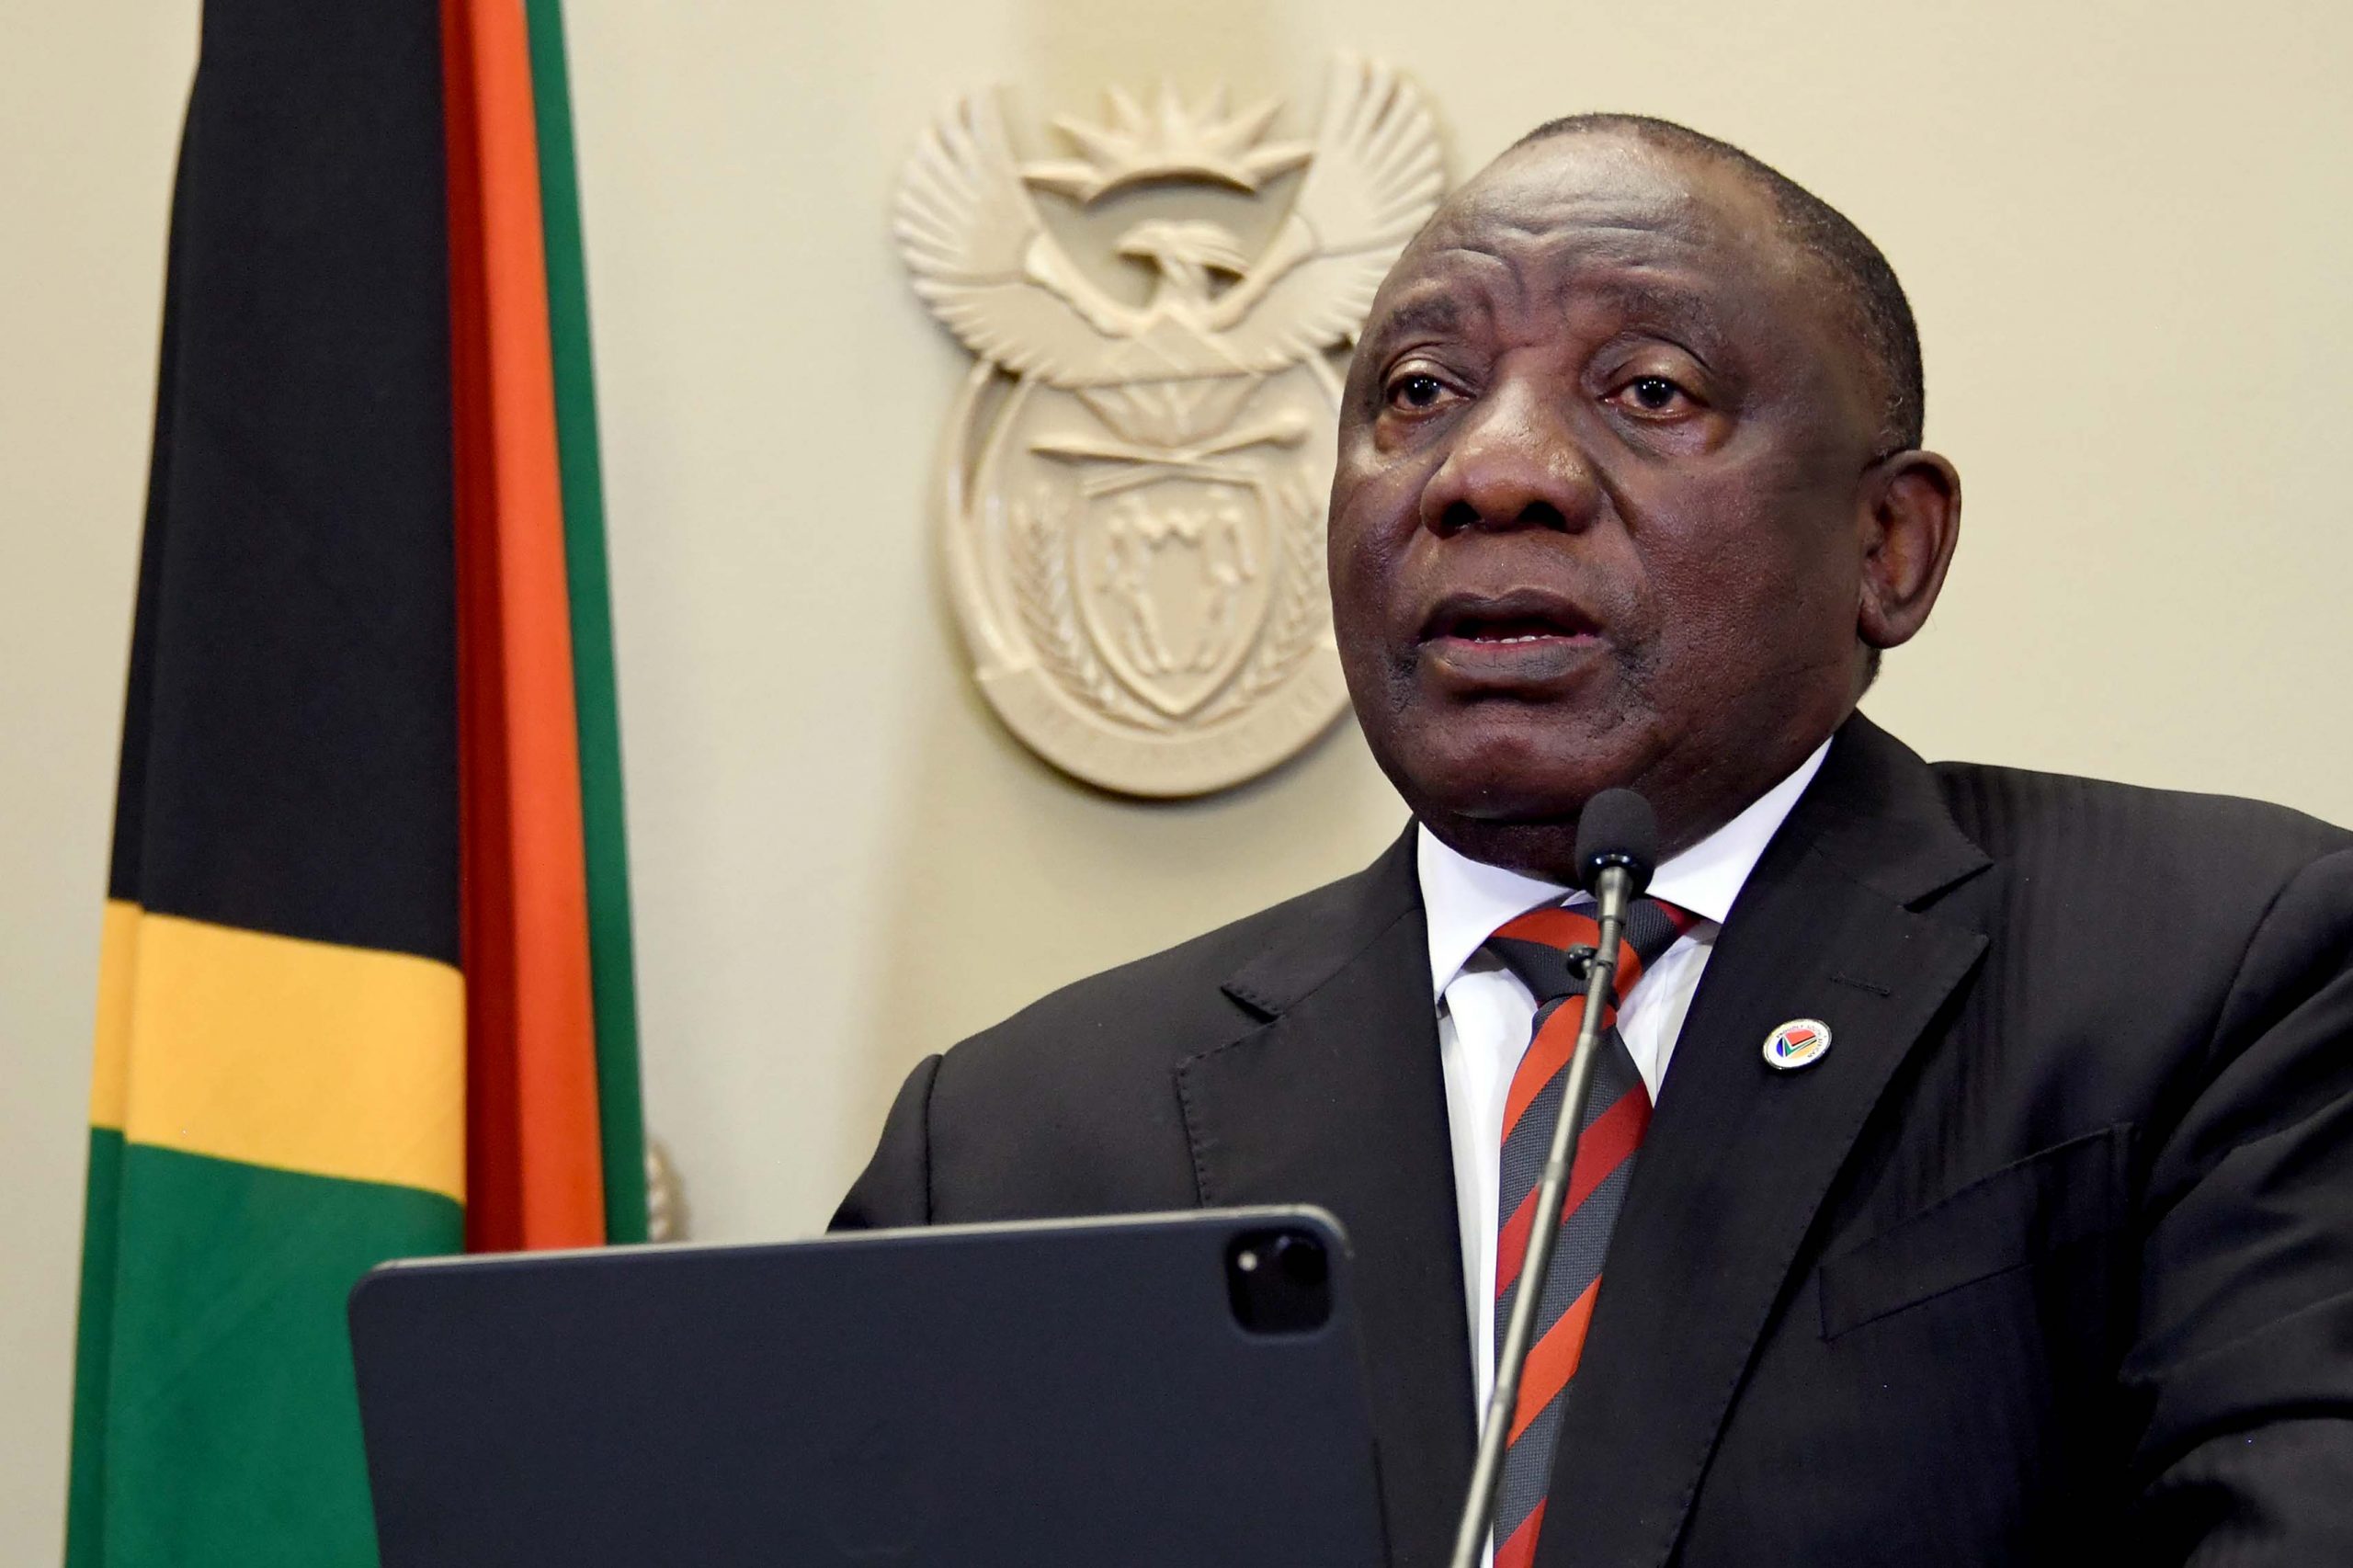 The national state of disaster was first implemented in March 2020 by President Cyril Ramaphosa.